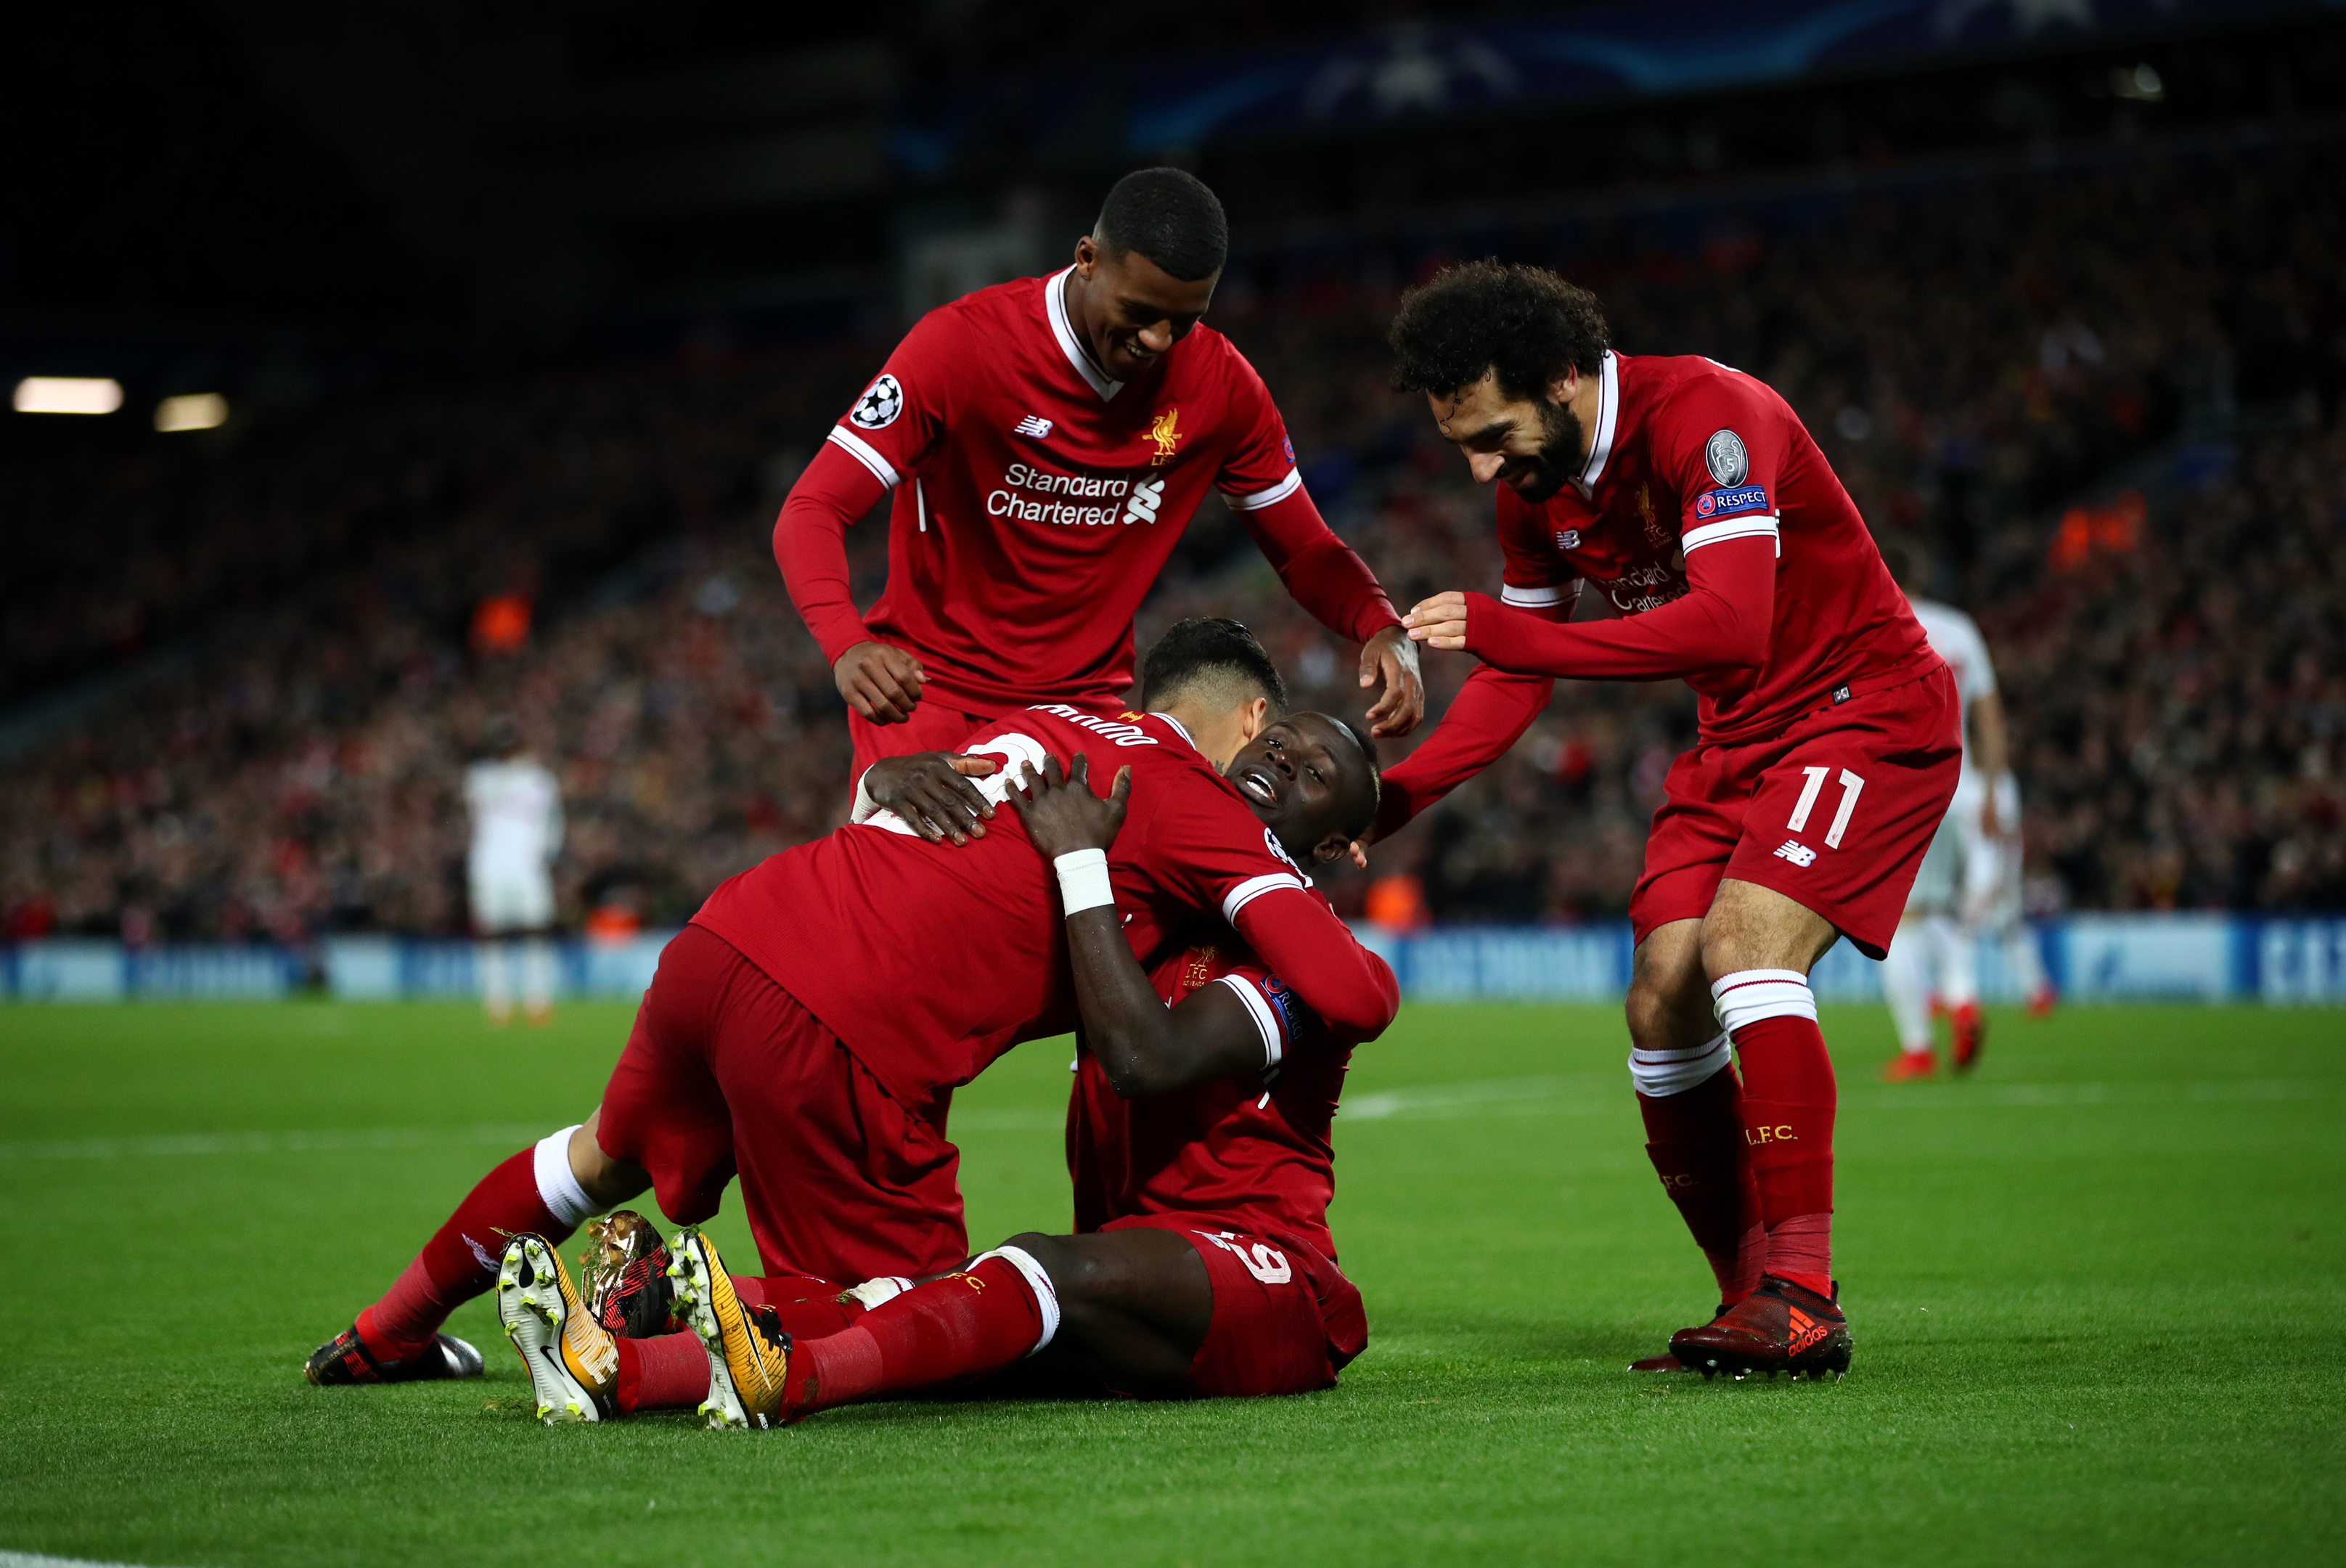 Sadio Mane of Liverpool celebrates scoring the 4th Liverpool goal with his teammates (Clive Brunskill/Getty Images)